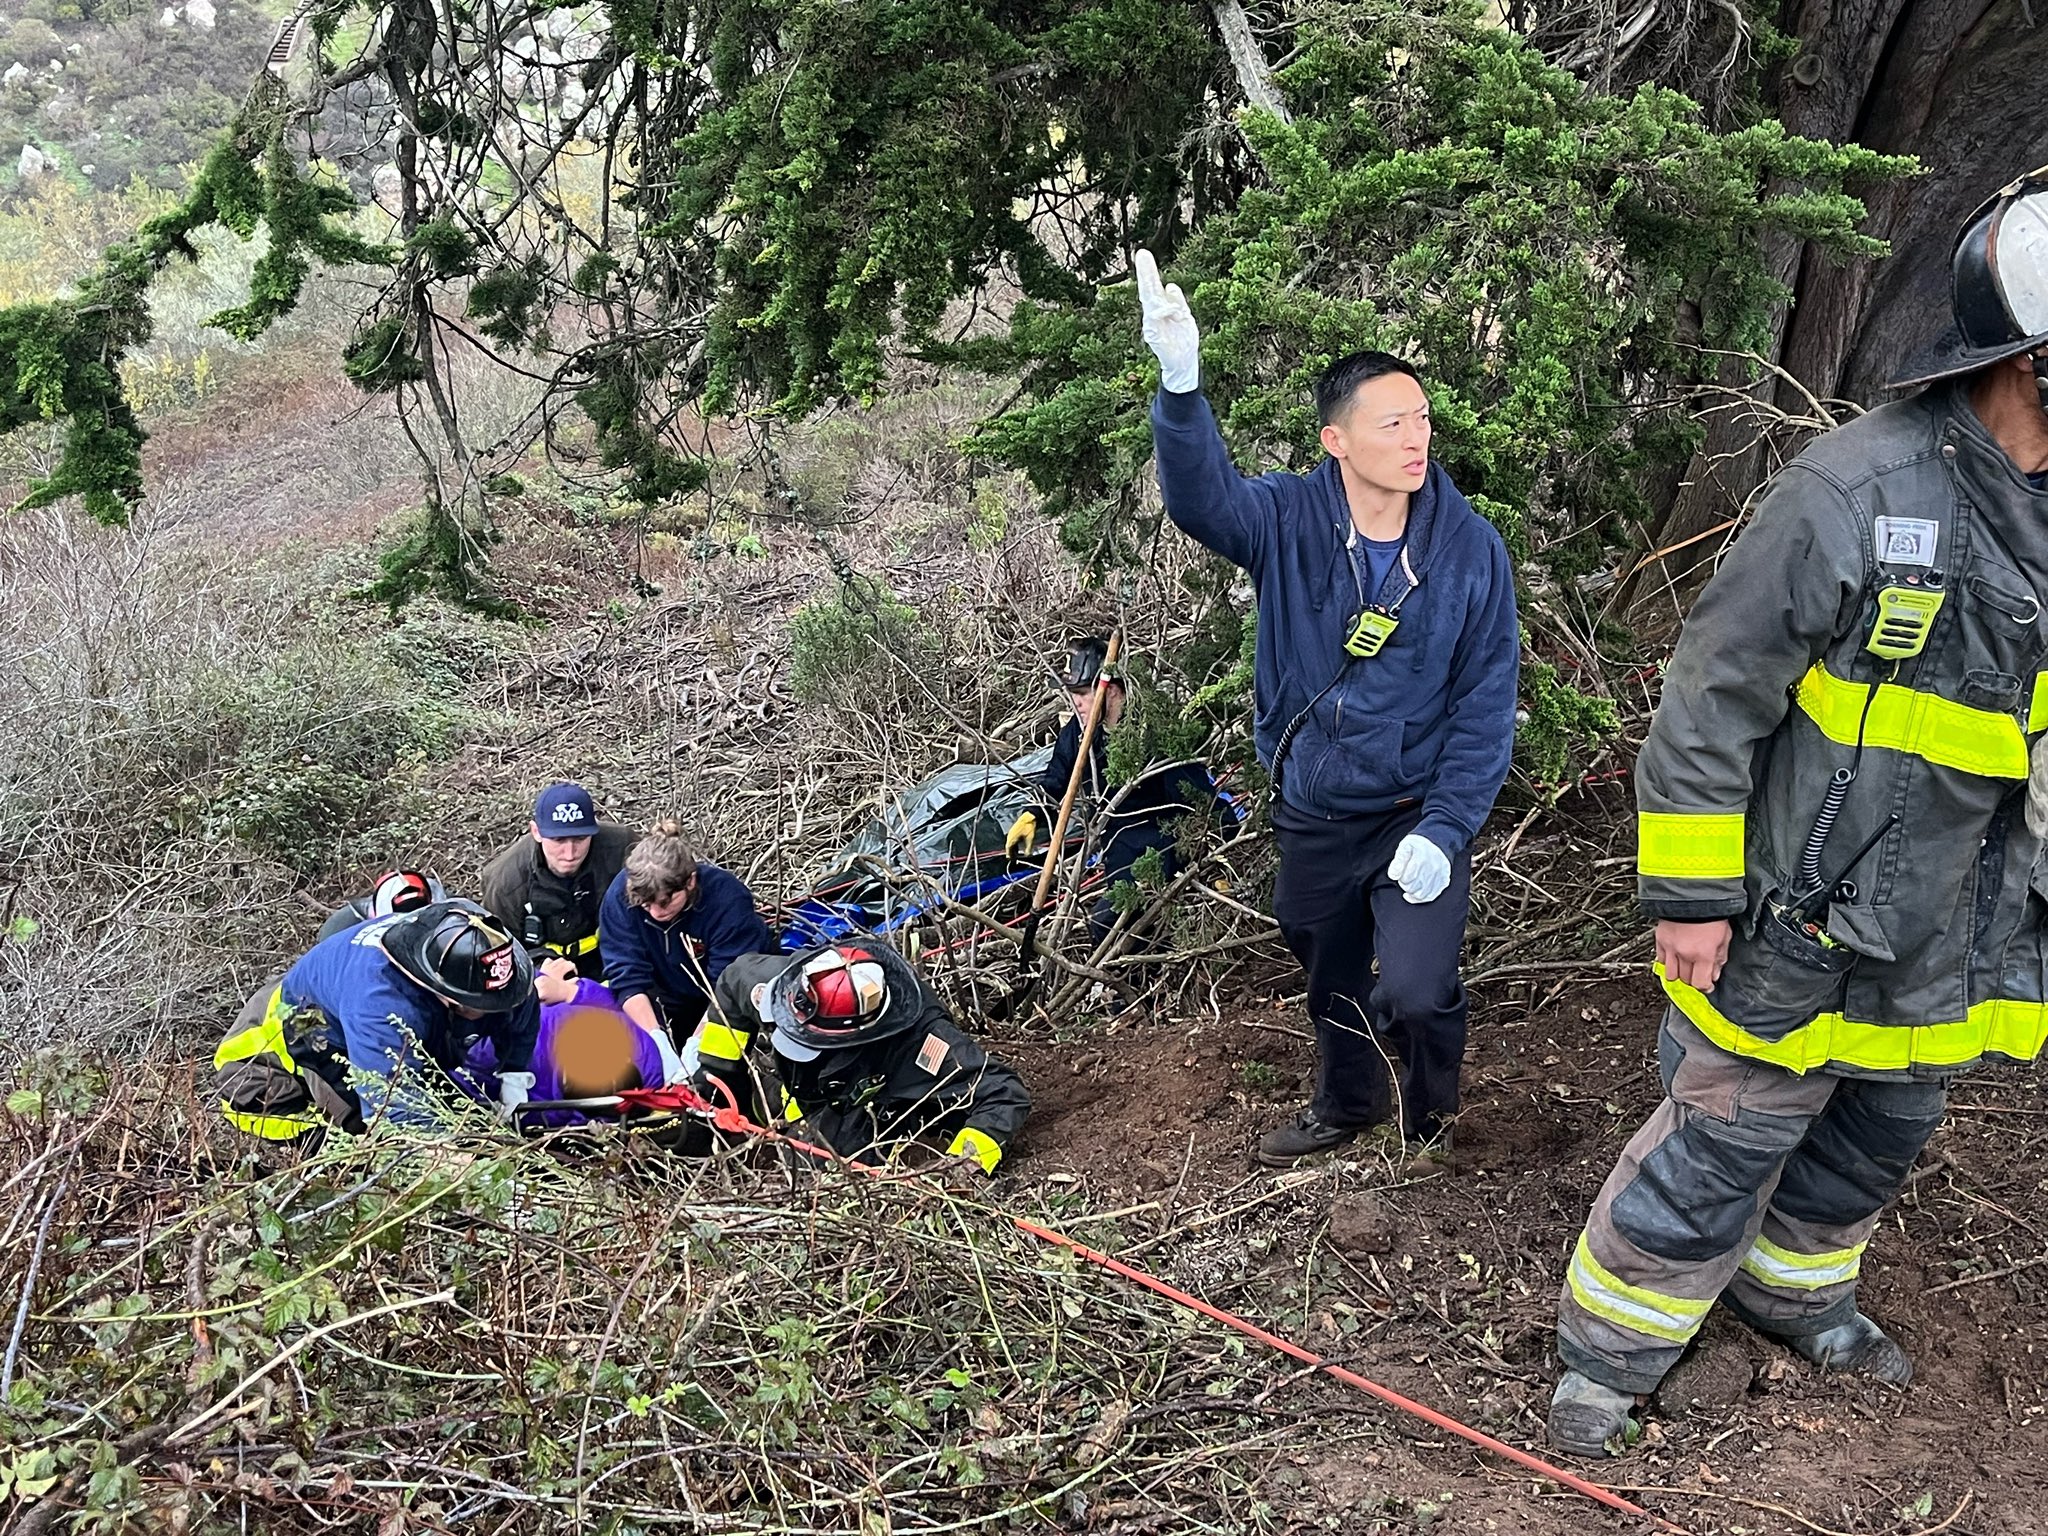 Firefighters and other officials pull person on stretcher up a slope covered in branches and brush